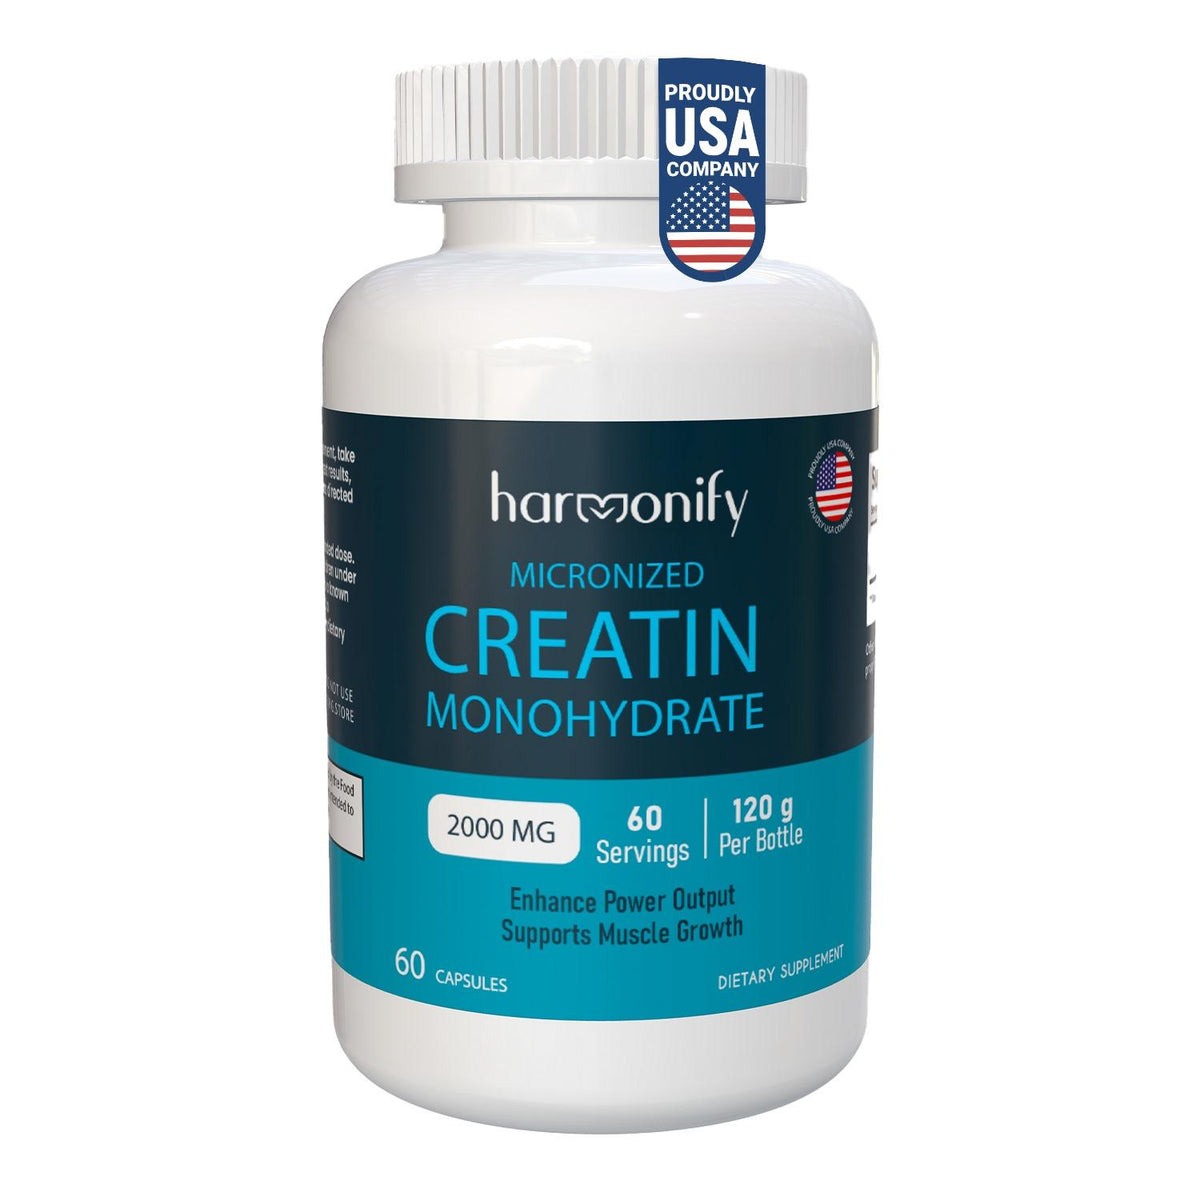 Creatine Monohydrate, Amino Acid Powder 2000 mg- Support Muscles, Cellular Energy and Cognitive Function - Gluten-Free, Keto - NSF Certified for Sport